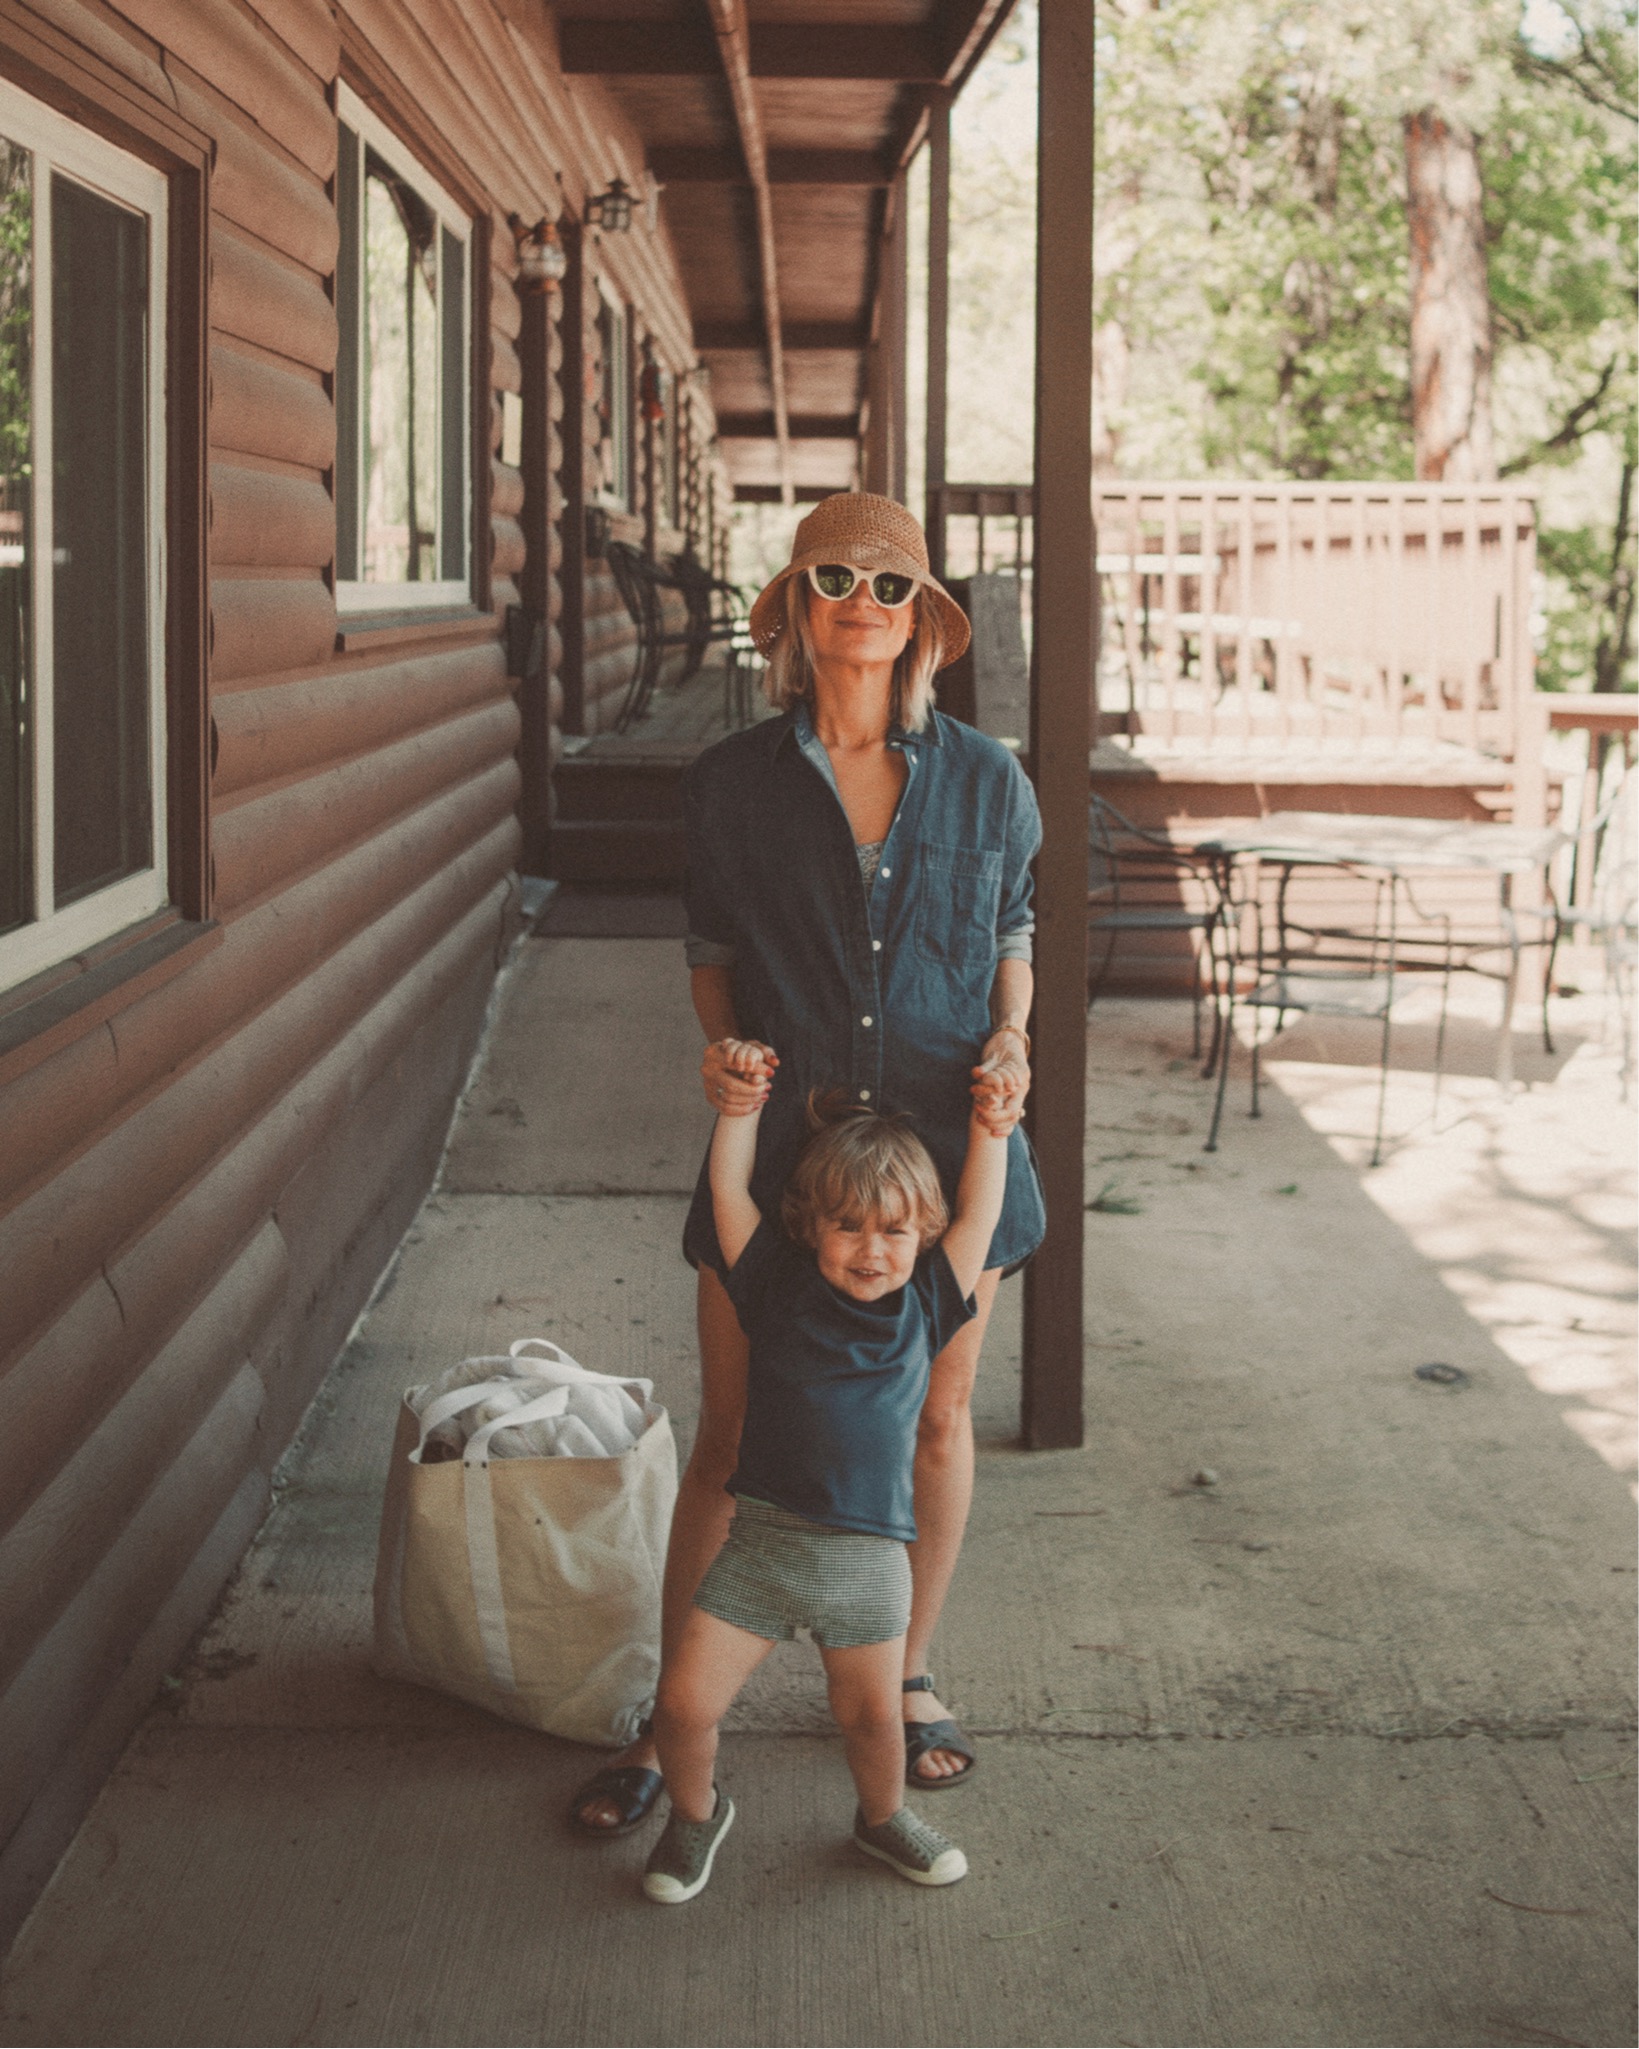 Karin Emily wears a blue long sleeve button down swimsuit coverup over a blue and white floral one piece swimsuit and a pair of black saltwater sandals with her son in a navy blue rashguard and gingham european style swim trunks